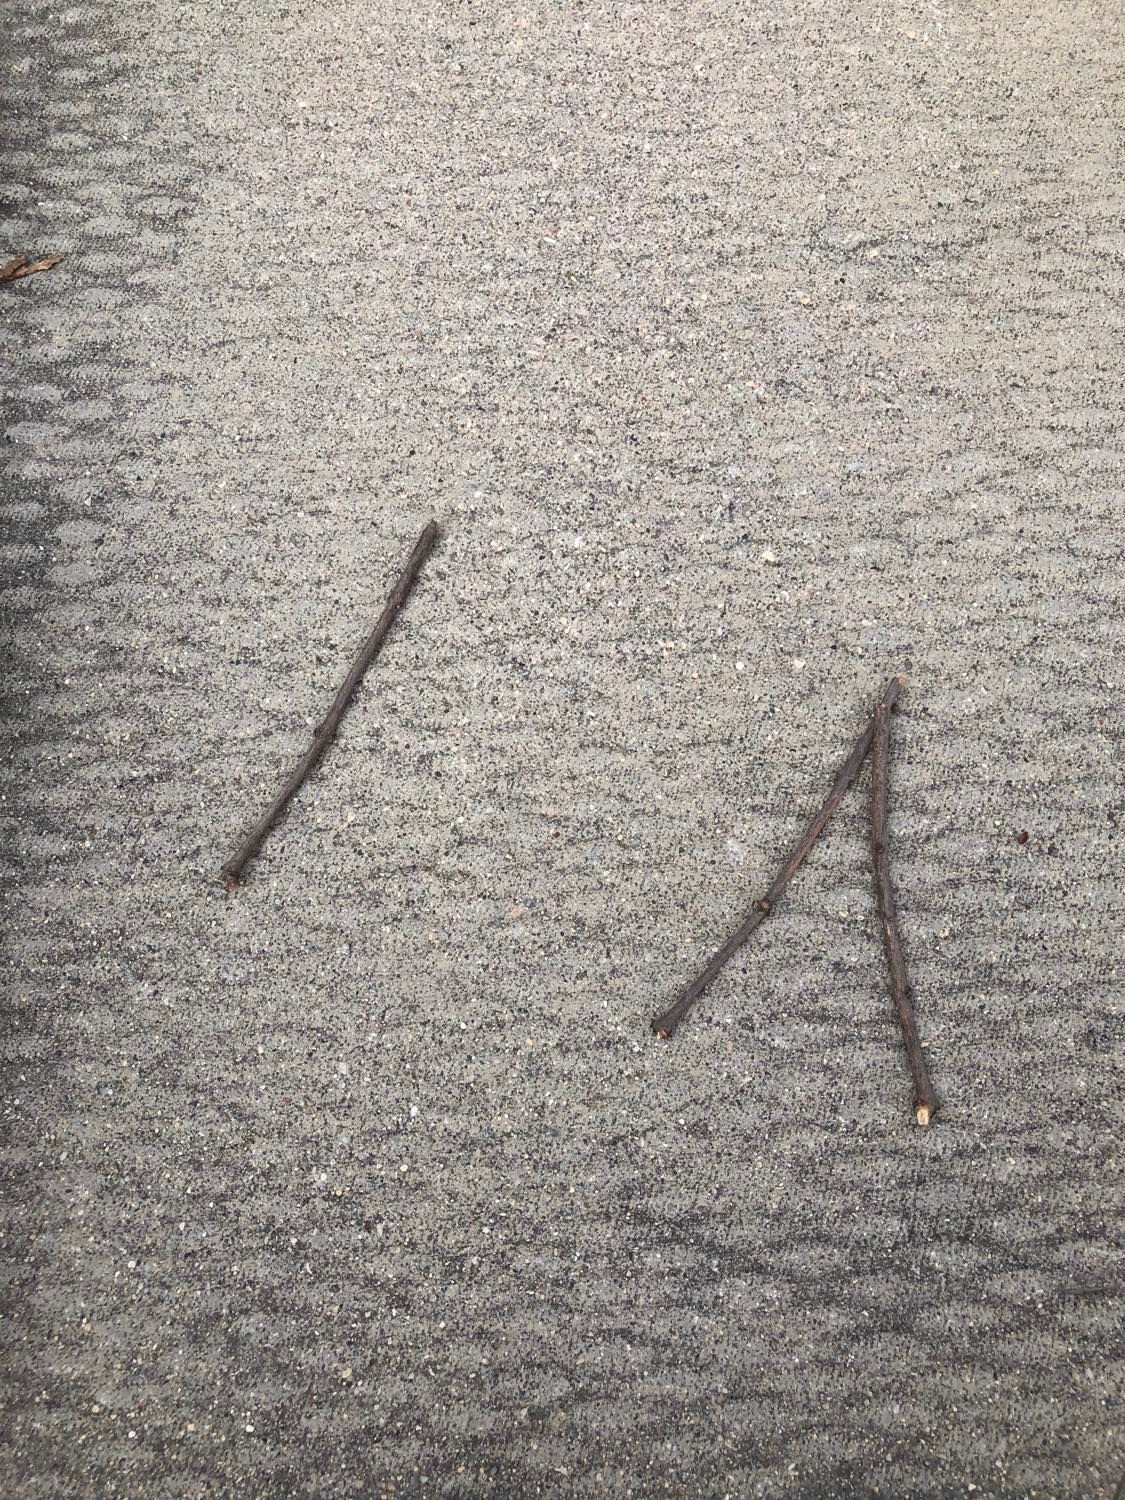 Three sticks on the ground, somewhat resembling a talking face, with one stick being the eyes, and the other two sticks forming a mouth.